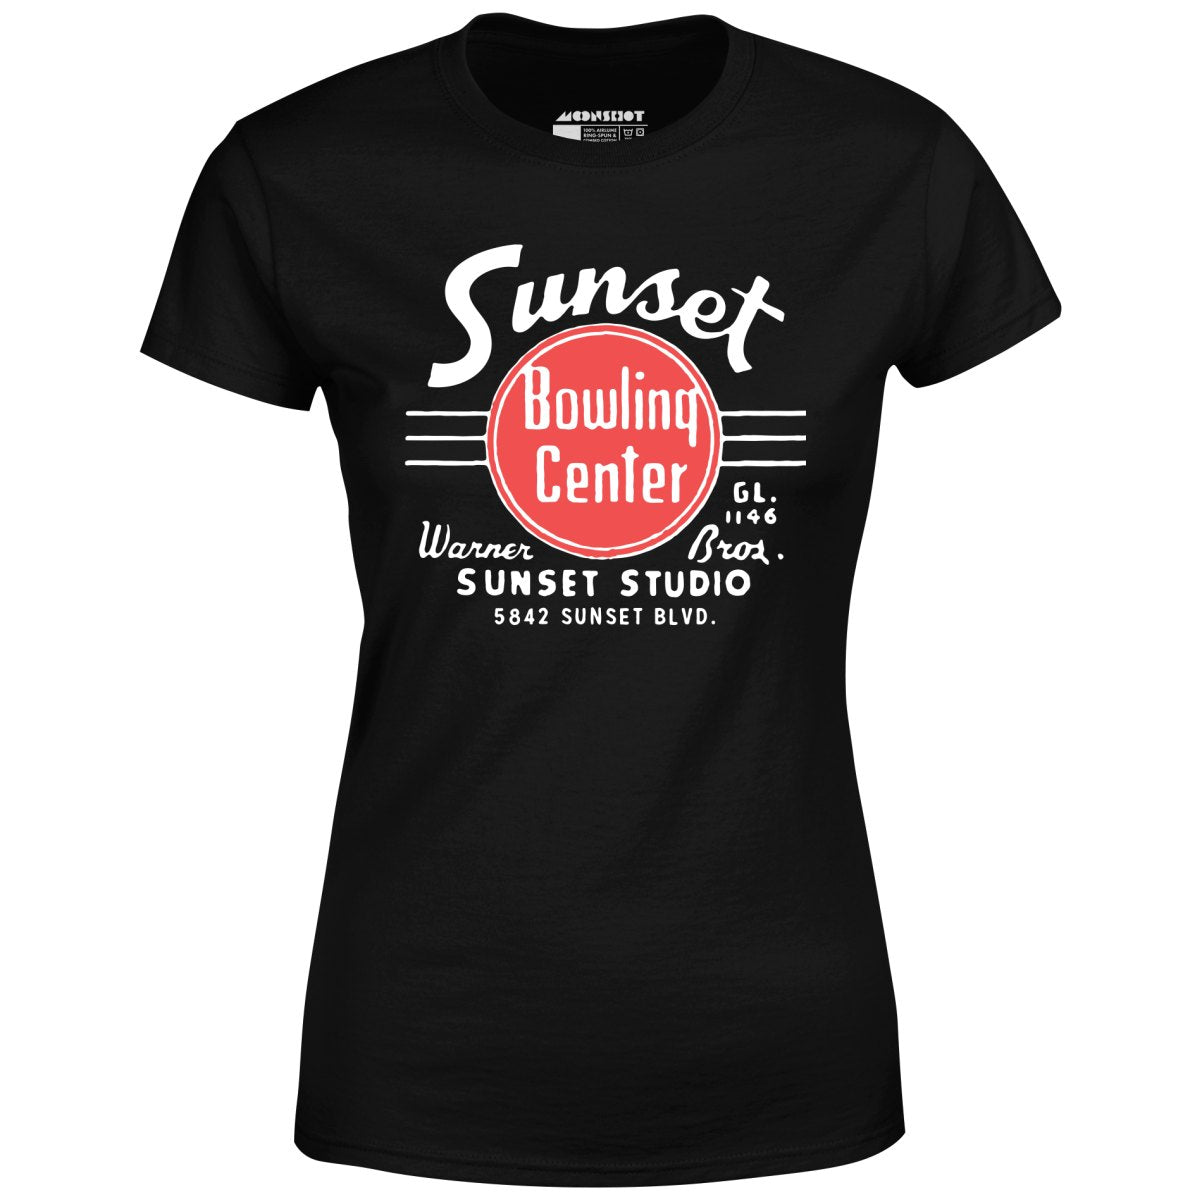 Sunset Bowling Center v2 - Hollywood, CA - Vintage Bowling Alley - Women's T-Shirt